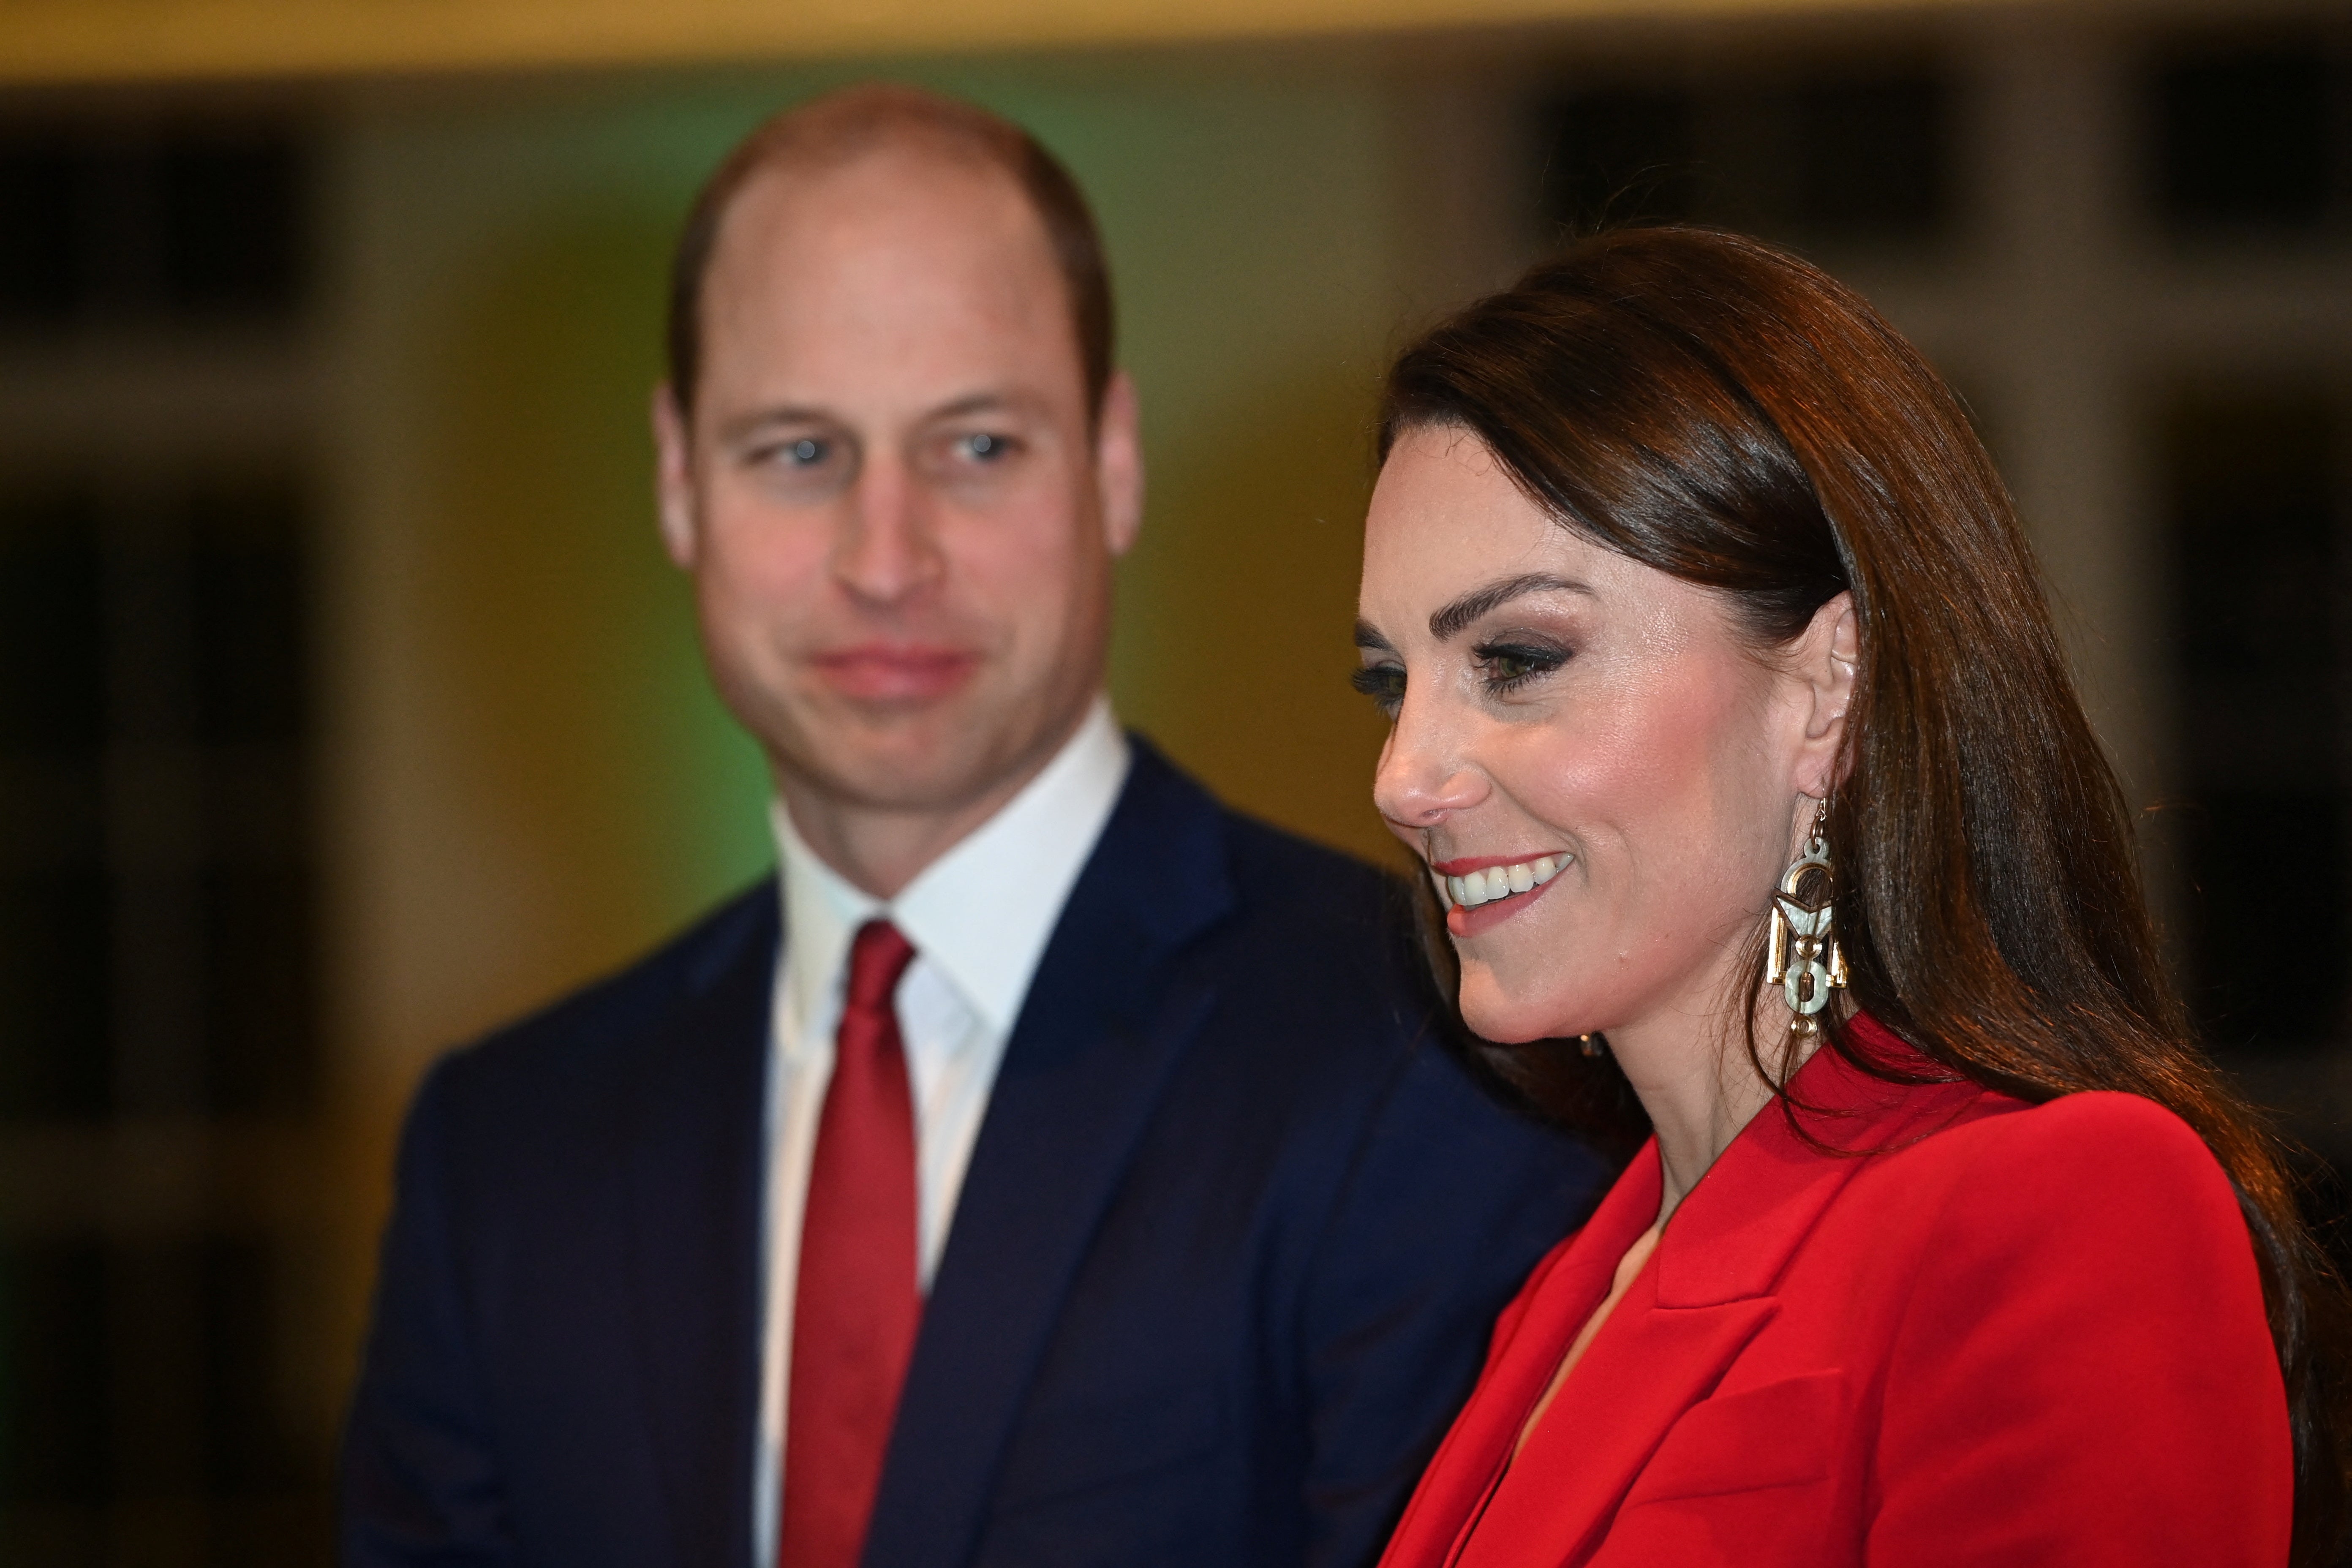 Prince William, Prince of Wales, and Catherine, Princess of Wales, attend a pre-campaign launch event, hosted by The Royal Foundation Centre for Early Childhood, at BAFTA